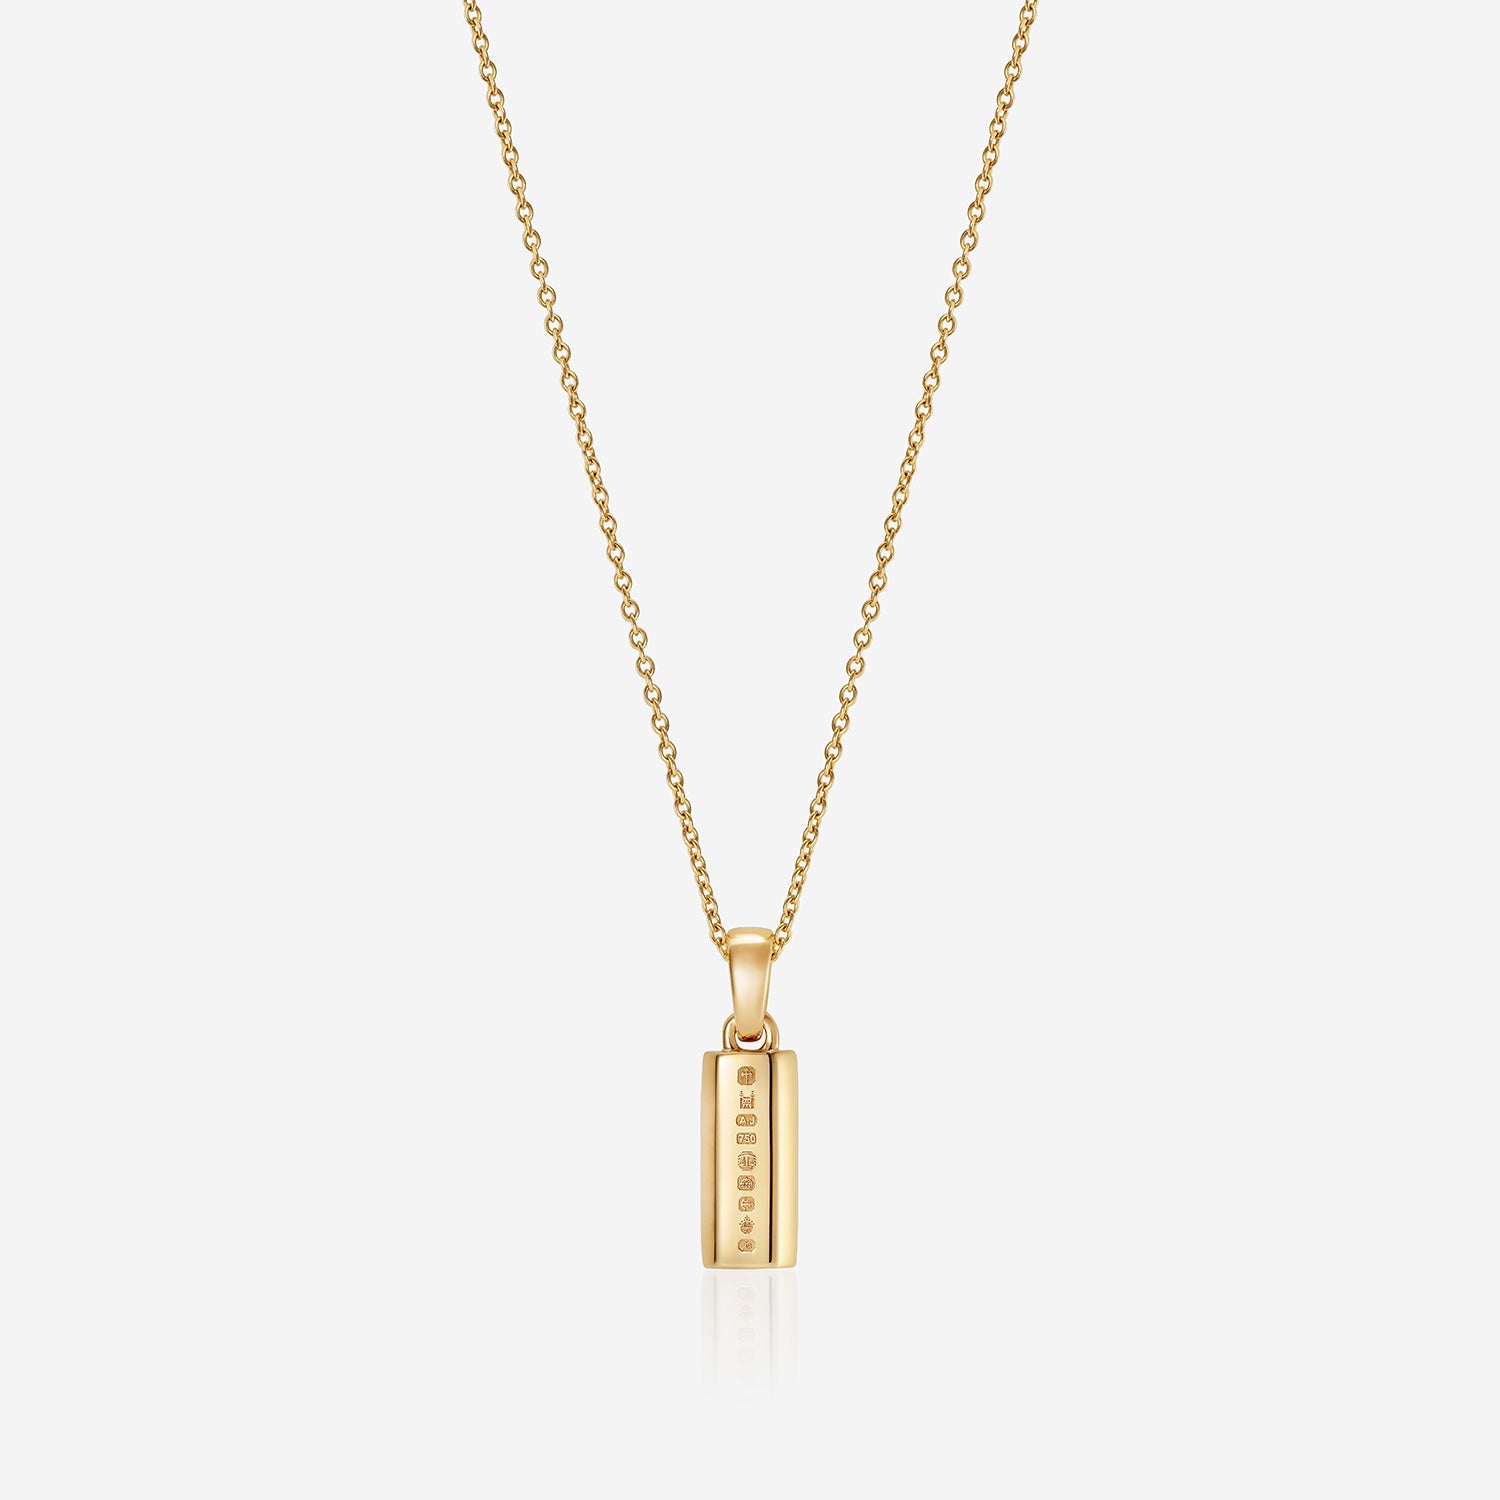 886 Royal Mint Necklaces 886 Small Bar Pendant with Chain in 18ct Yellow Gold